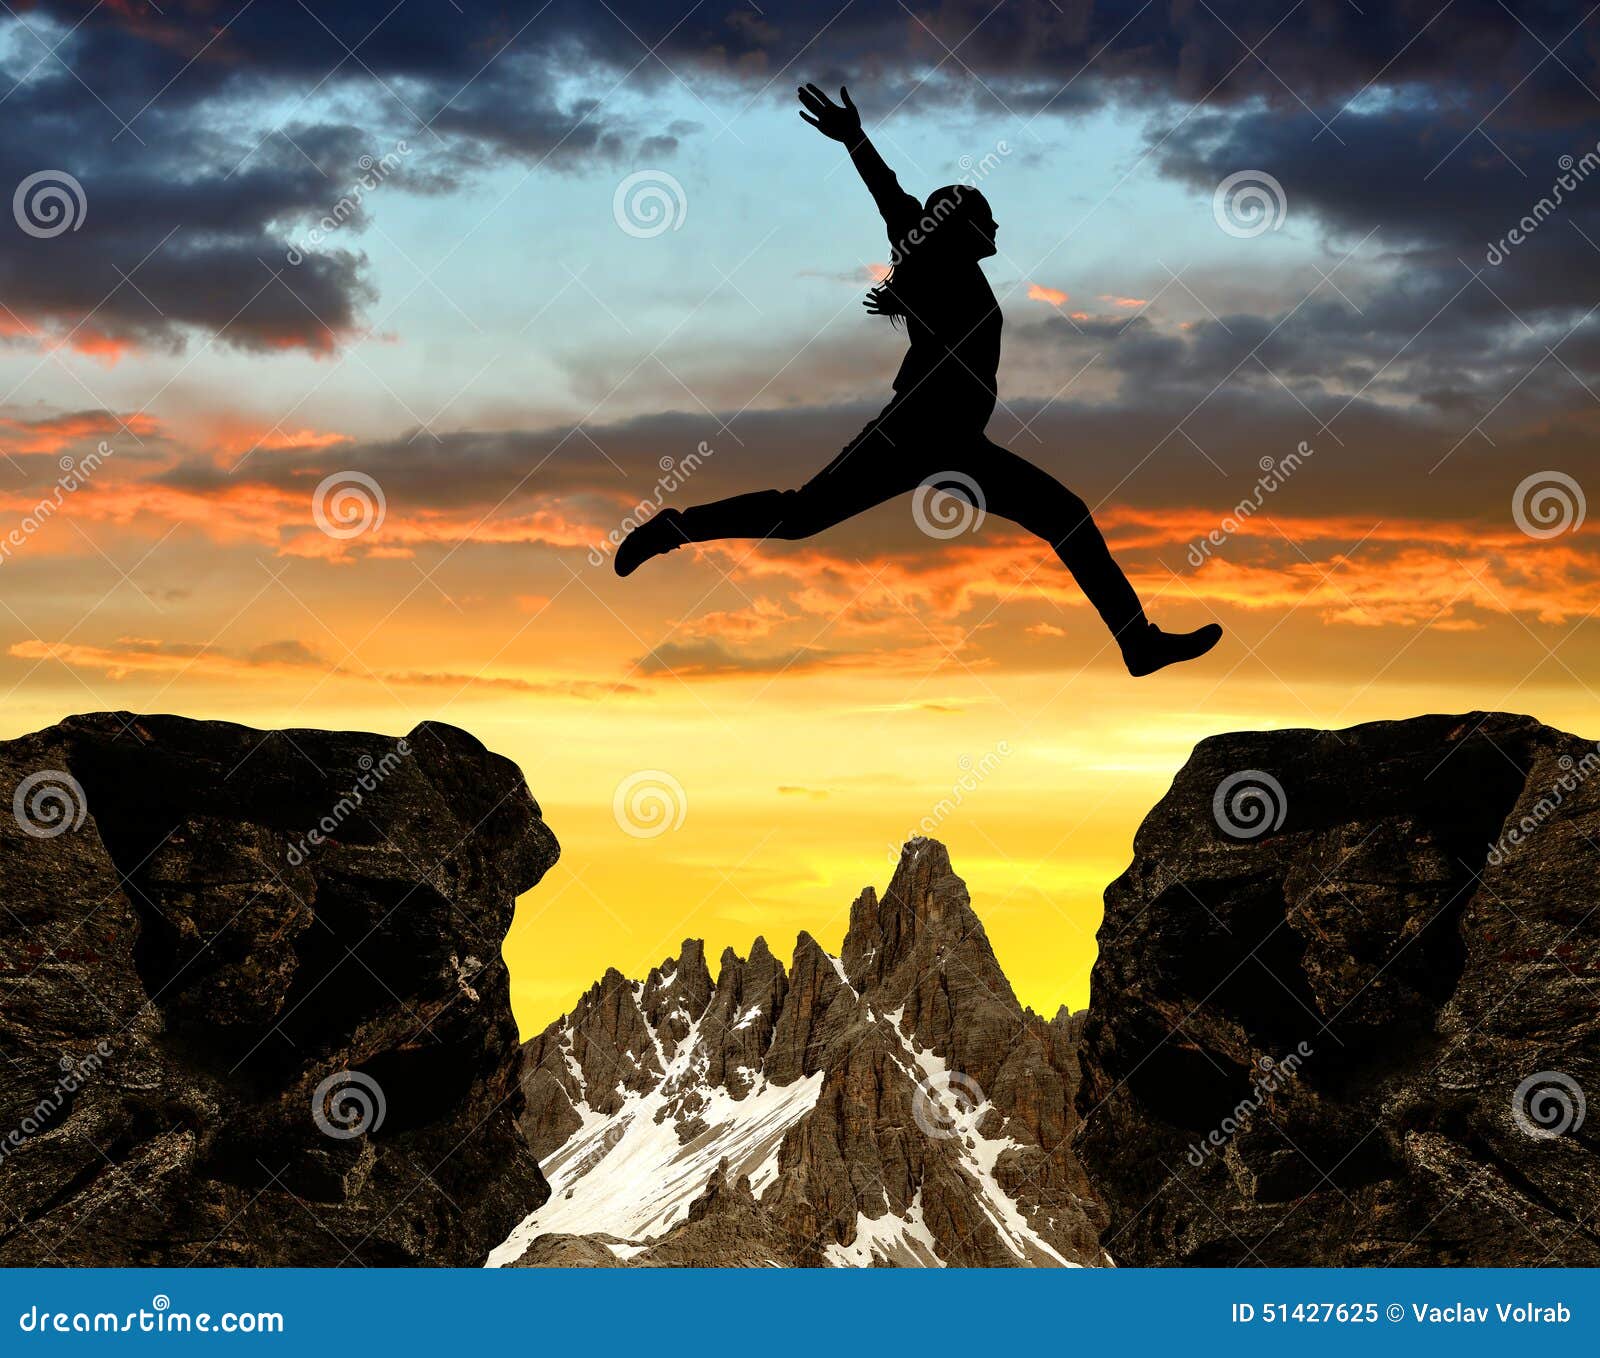 girl jumping over the gap